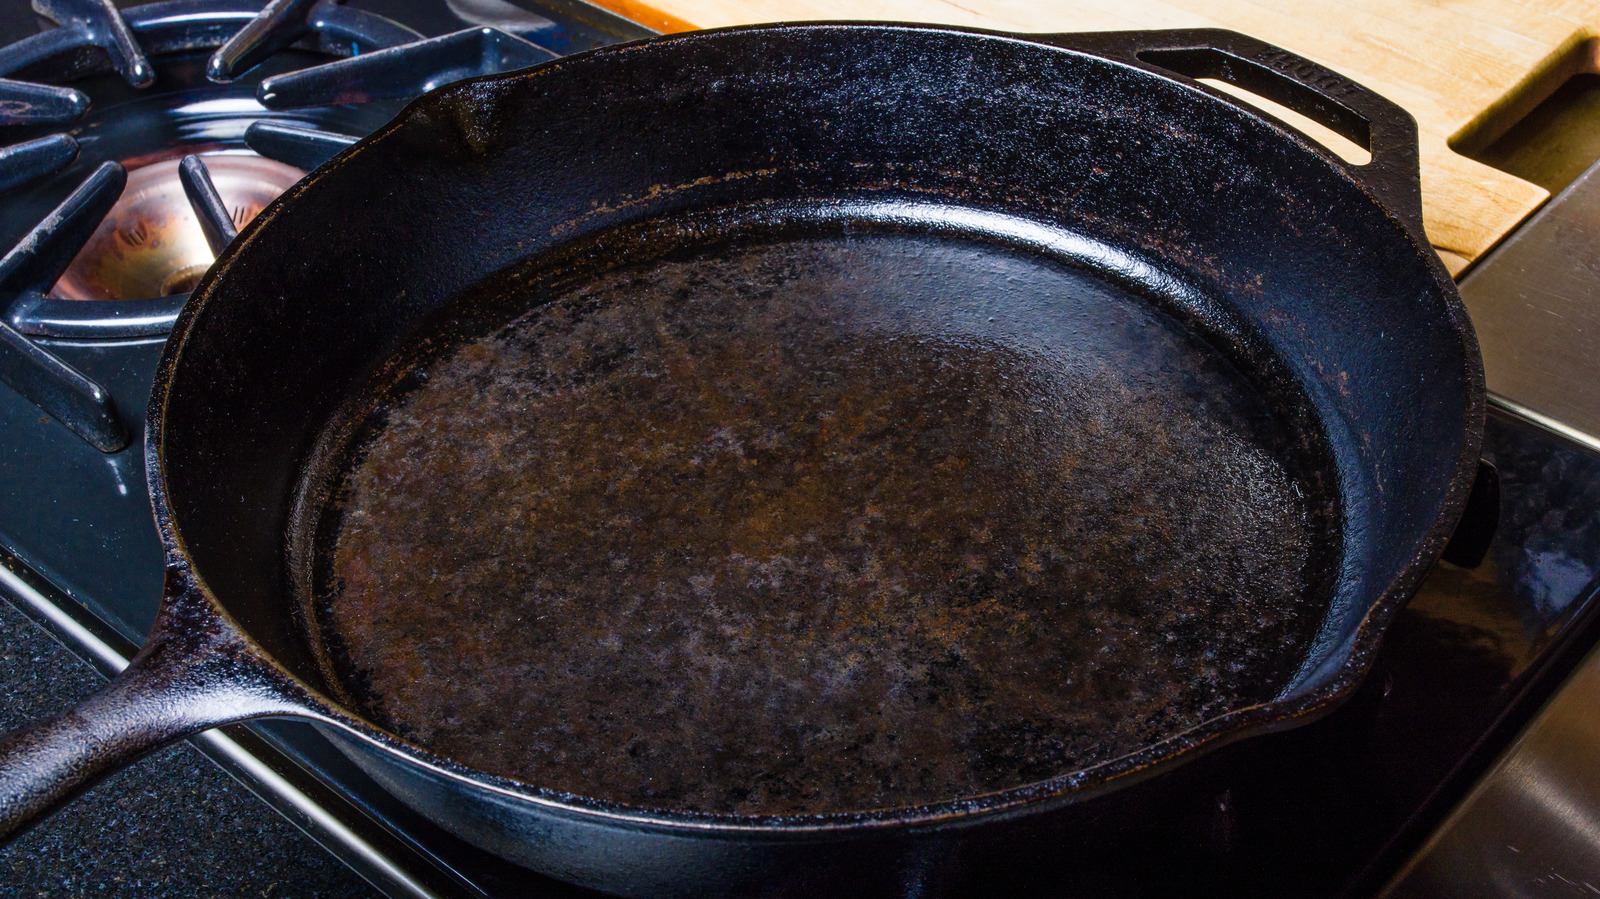 The Best Oil to Season a Cast Iron Pan? Grapeseed Oil. Here's Why